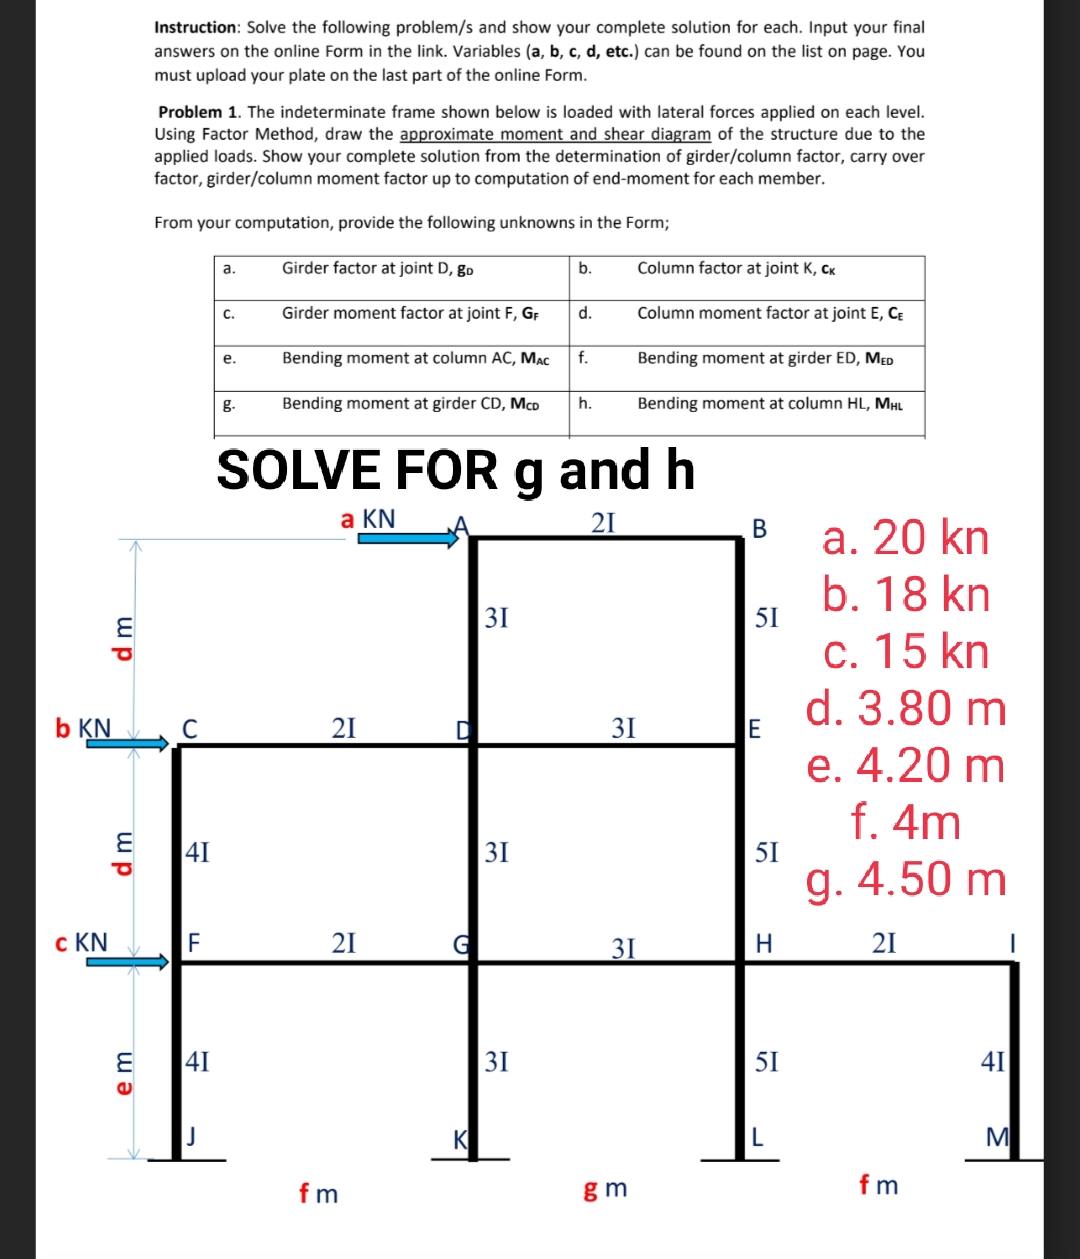 b KN
c KN
wp
E
dm
em
Instruction: Solve the following problem/s and show your complete solution for each. Input your final
answers on the online Form in the link. Variables (a, b, c, d, etc.) can be found on the list on page. You
must upload your plate on the last part of the online Form.
Problem 1. The indeterminate frame shown below is loaded with lateral forces applied on each level.
Using Factor Method, draw the approximate moment and shear diagram of the structure due to the
applied loads. Show your complete solution from the determination of girder/column factor, carry over
factor, girder/column moment factor up to computation of end-moment for each member.
From your computation, provide the following unknowns in the Form;
a.
Girder factor at joint D, go
b.
Column factor at joint K, CK
C.
Girder moment factor at joint F, GF
d.
Column moment factor at joint E, CE
e.
Bending moment at column AC, MAC
f.
Bending moment at girder ED, MED
g.
Bending moment at girder CD, MCD
h.
Bending moment at column HL, MHL
SOLVE FOR g and h
a KN
21
B
31
31
31
C
41
F
41
21
21
fm
K
31
31
gm
51
E
51
H
51
L
a. 20 kn
b. 18 kn
c. 15 kn
d. 3.80 m
e. 4.20 m
f. 4m
g. 4.50 m
21
41
fm
M